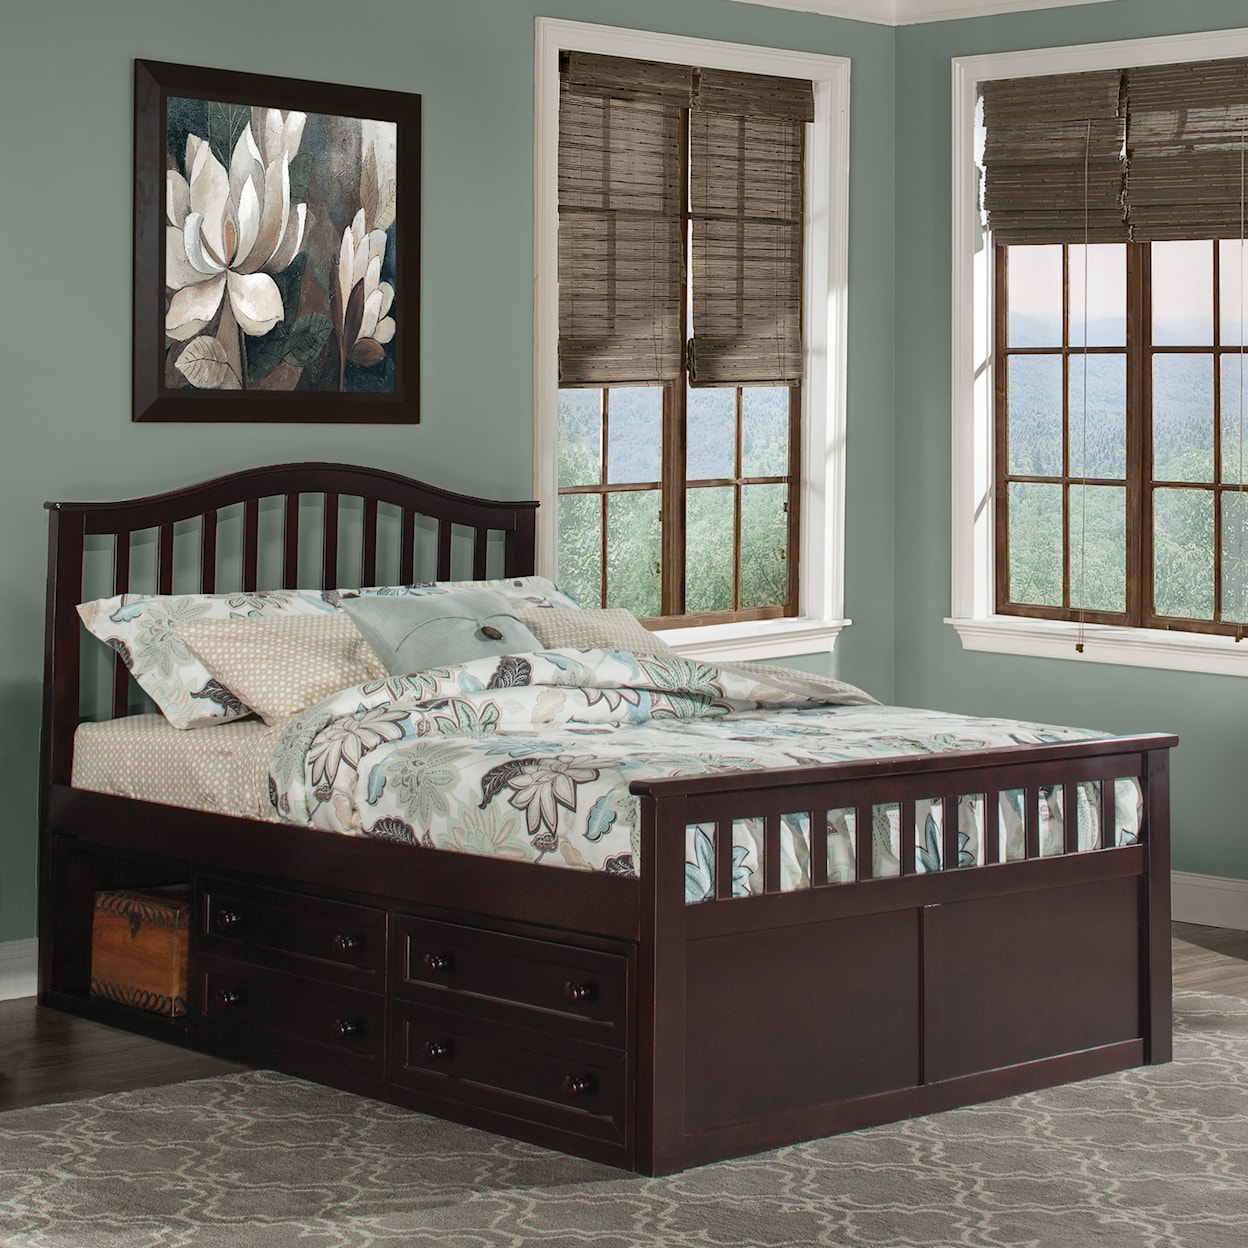 NE Kids Schoolhouse 4.0 Bed Accessories and Parts